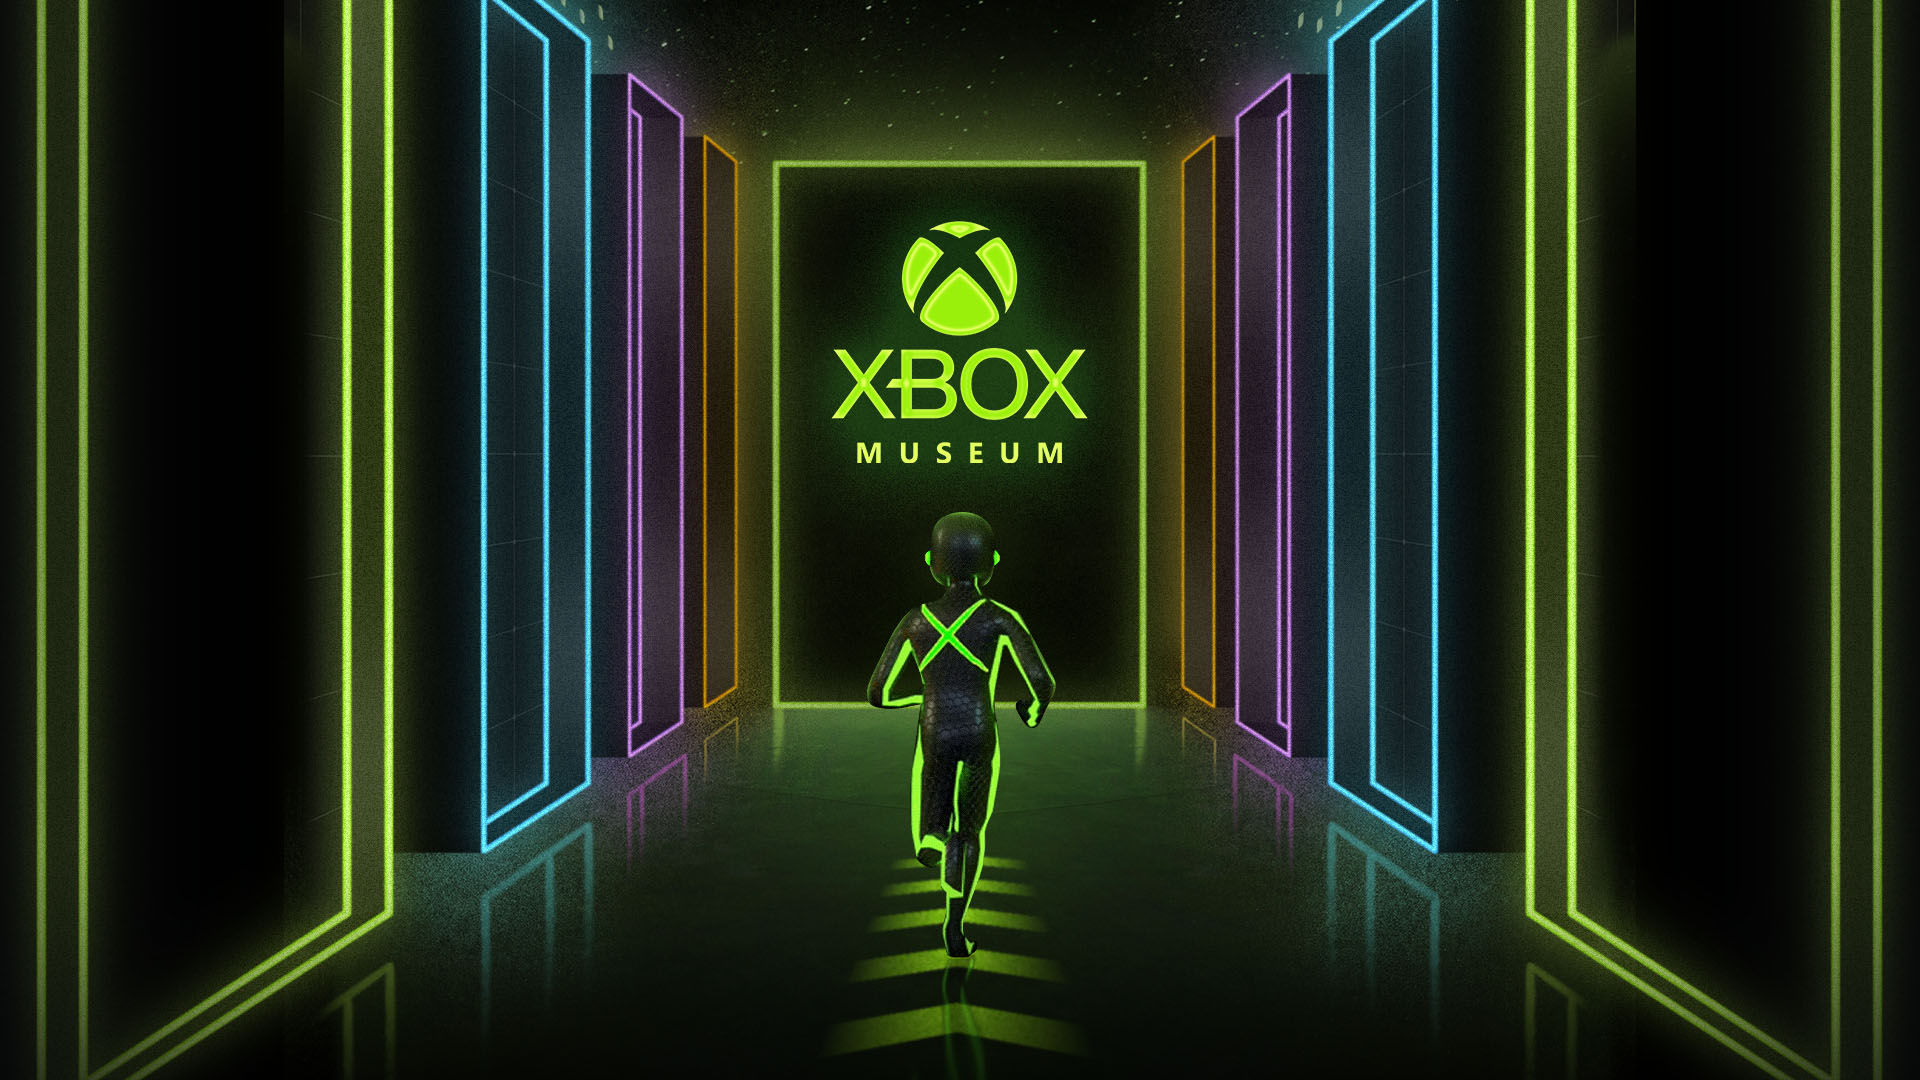 Xbox's time to explore your gaming legacy.​ ​ Take a virtual trip through 20 years of Xbox history and see all the games and accomplishments you collected:. #